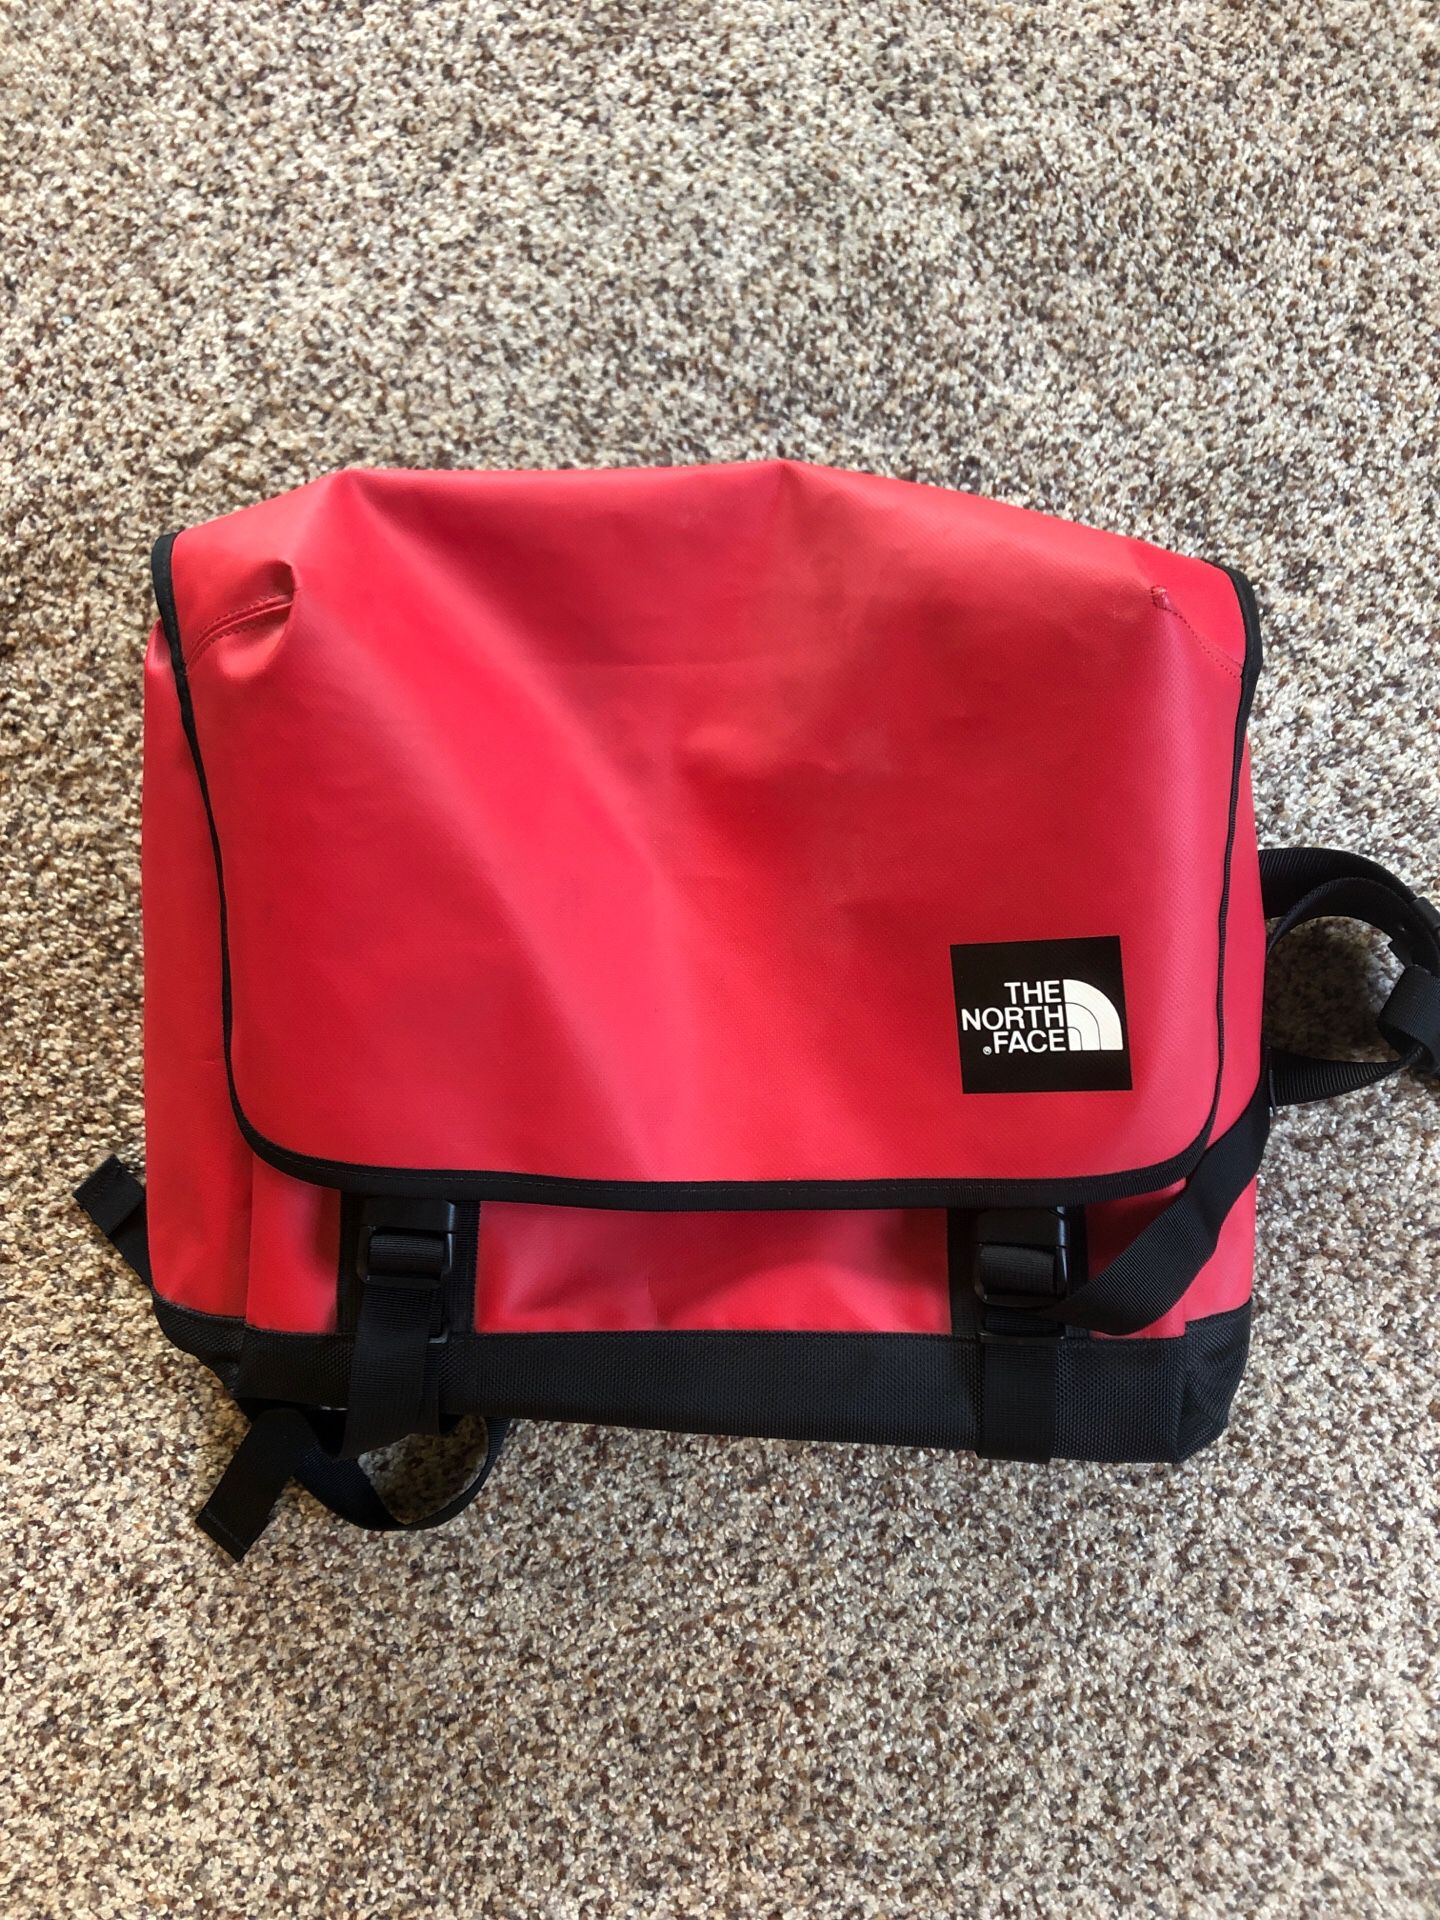 The North Face, messenger bag